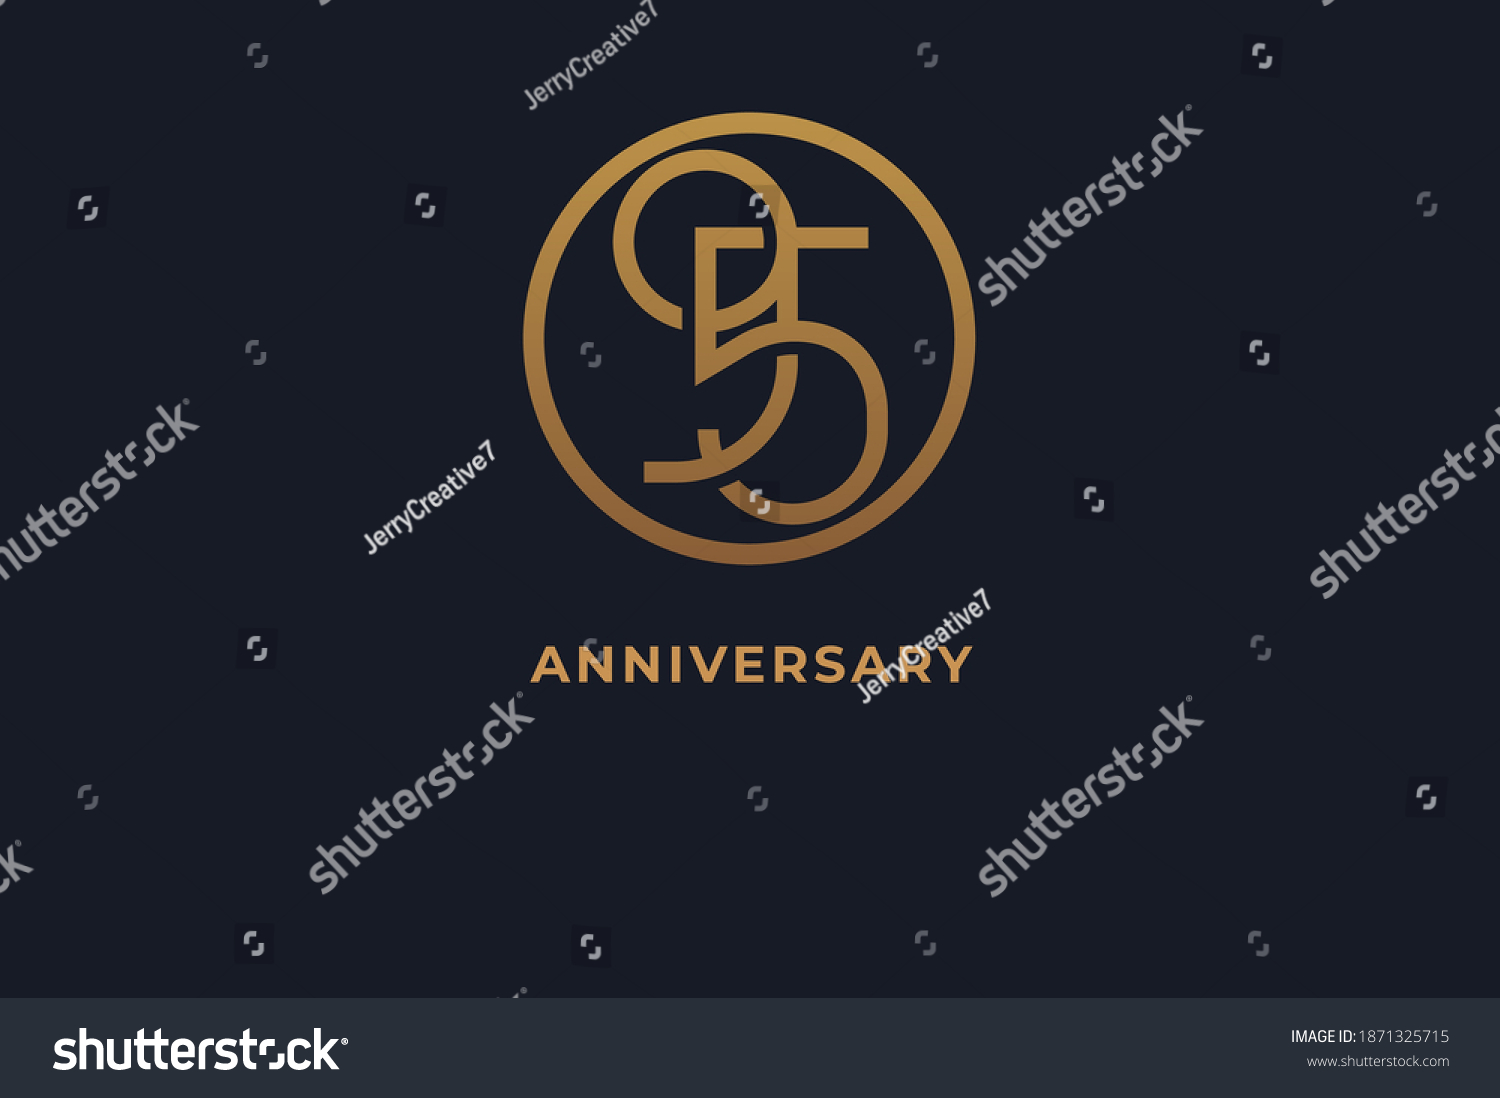 SVG of Number 95 logo, gold line circle with number inside, usable for anniversary and invitation, golden number design template, vector illustration svg